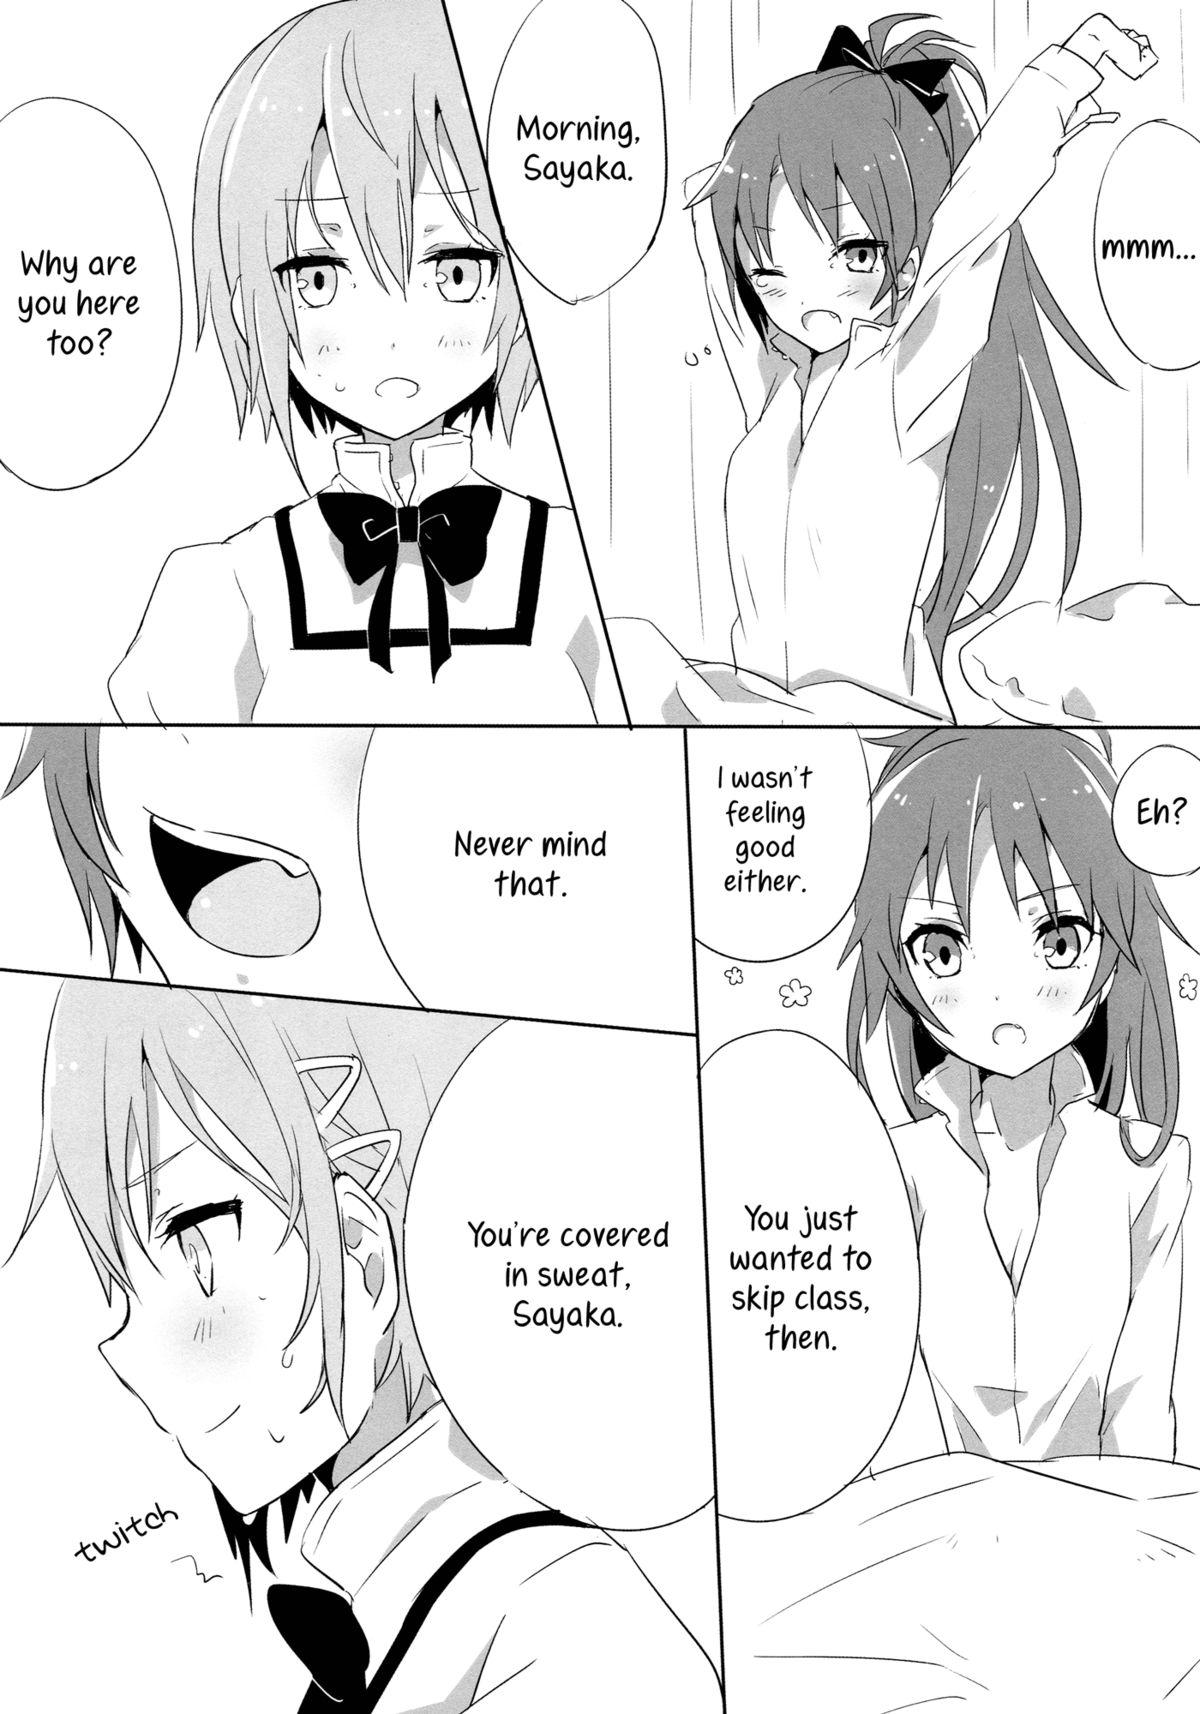 Weird How is condition? - Puella magi madoka magica Amature Porn - Page 6